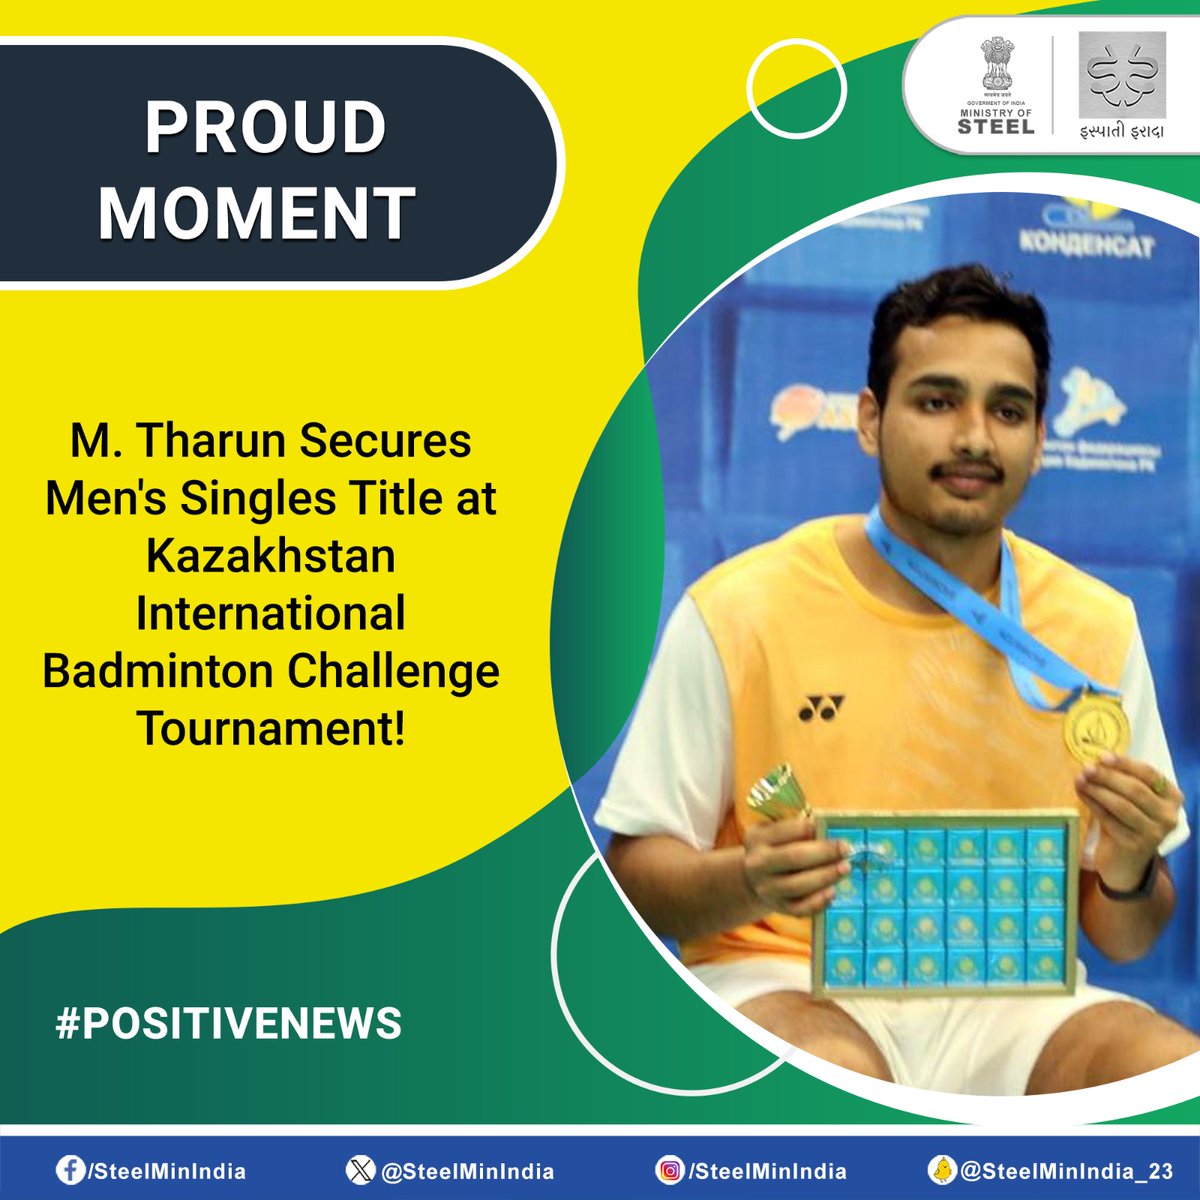 Indian shuttler #MTharun emerged victorious, clinching the Men's singles title at the Kazakhstan International Badminton Challenge tournament, in Astana! Heartiest congratulations to M. Tharun on this remarkable achievement! 🇮🇳🏸 #PositiveNews #BadmintonChampion